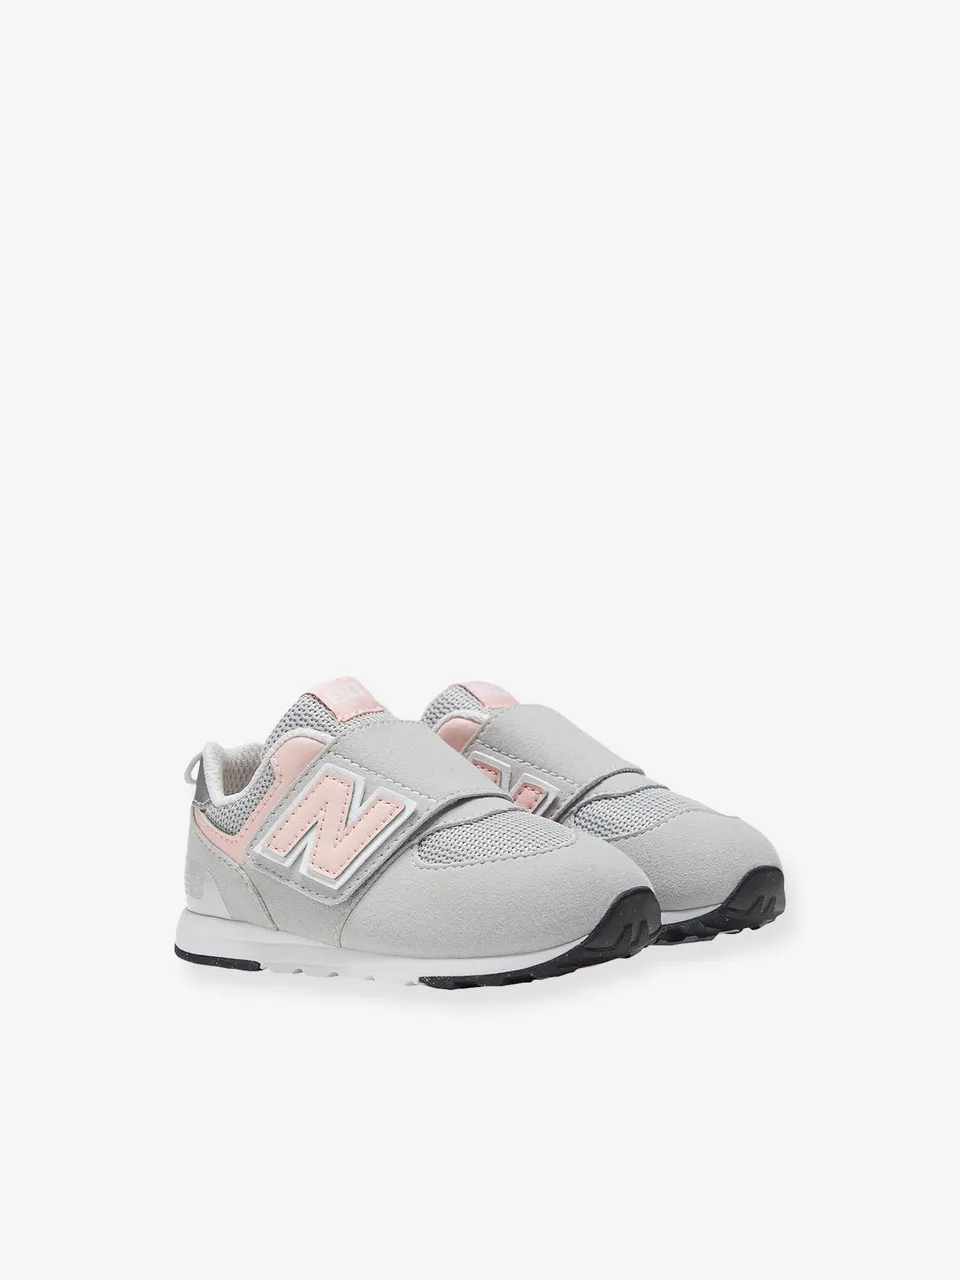 Baby Klett-Sneakers NW574PK NEW BALANCE maus